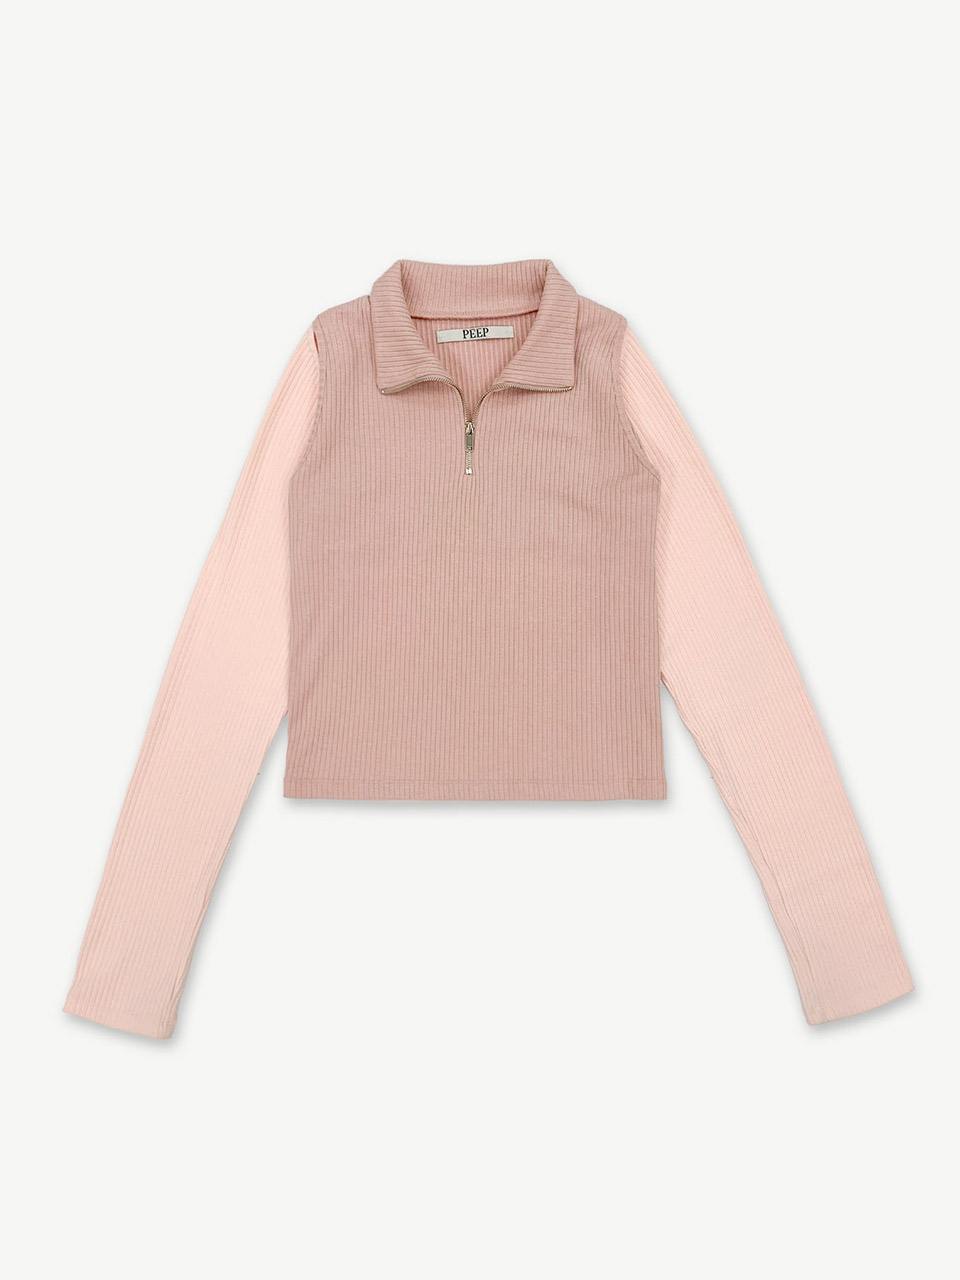 Double Layered Zip-Up - Coral